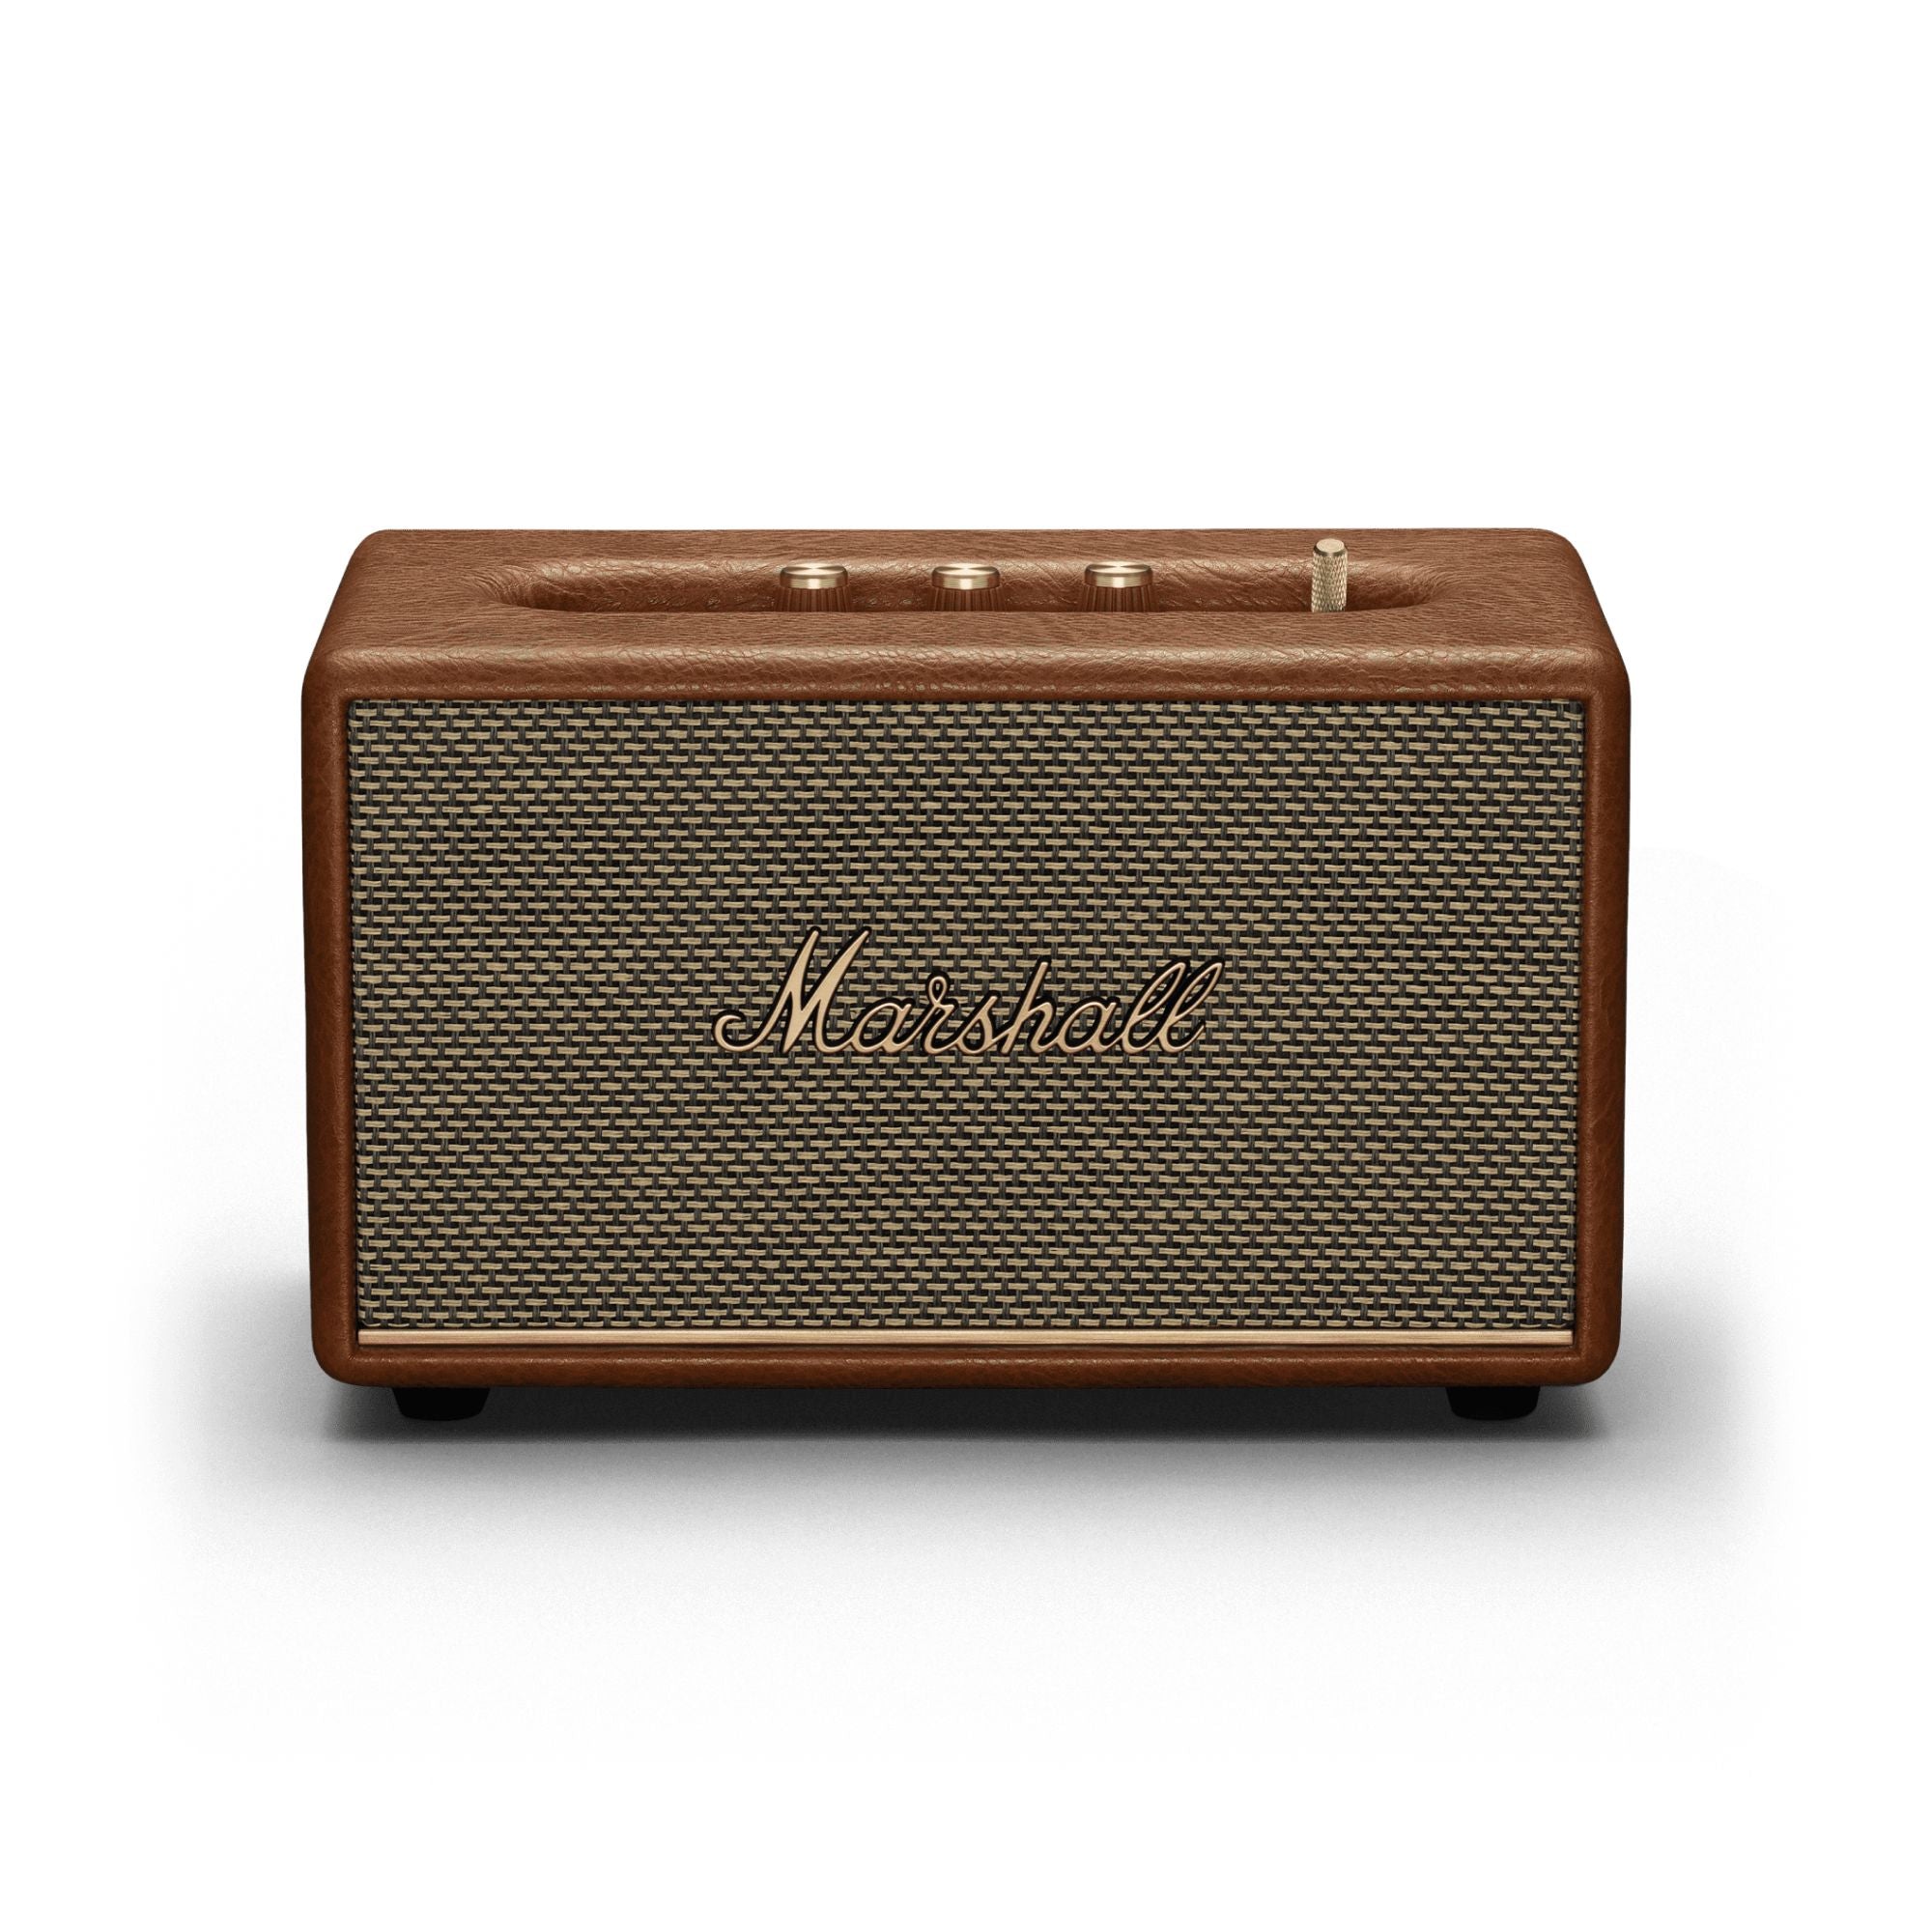 Marshall Acton III - The Small But Mighty Workhorse Re-Engineered With a Wider Soundstage, Marshall, Bluetooth Speaker - AVStore.in